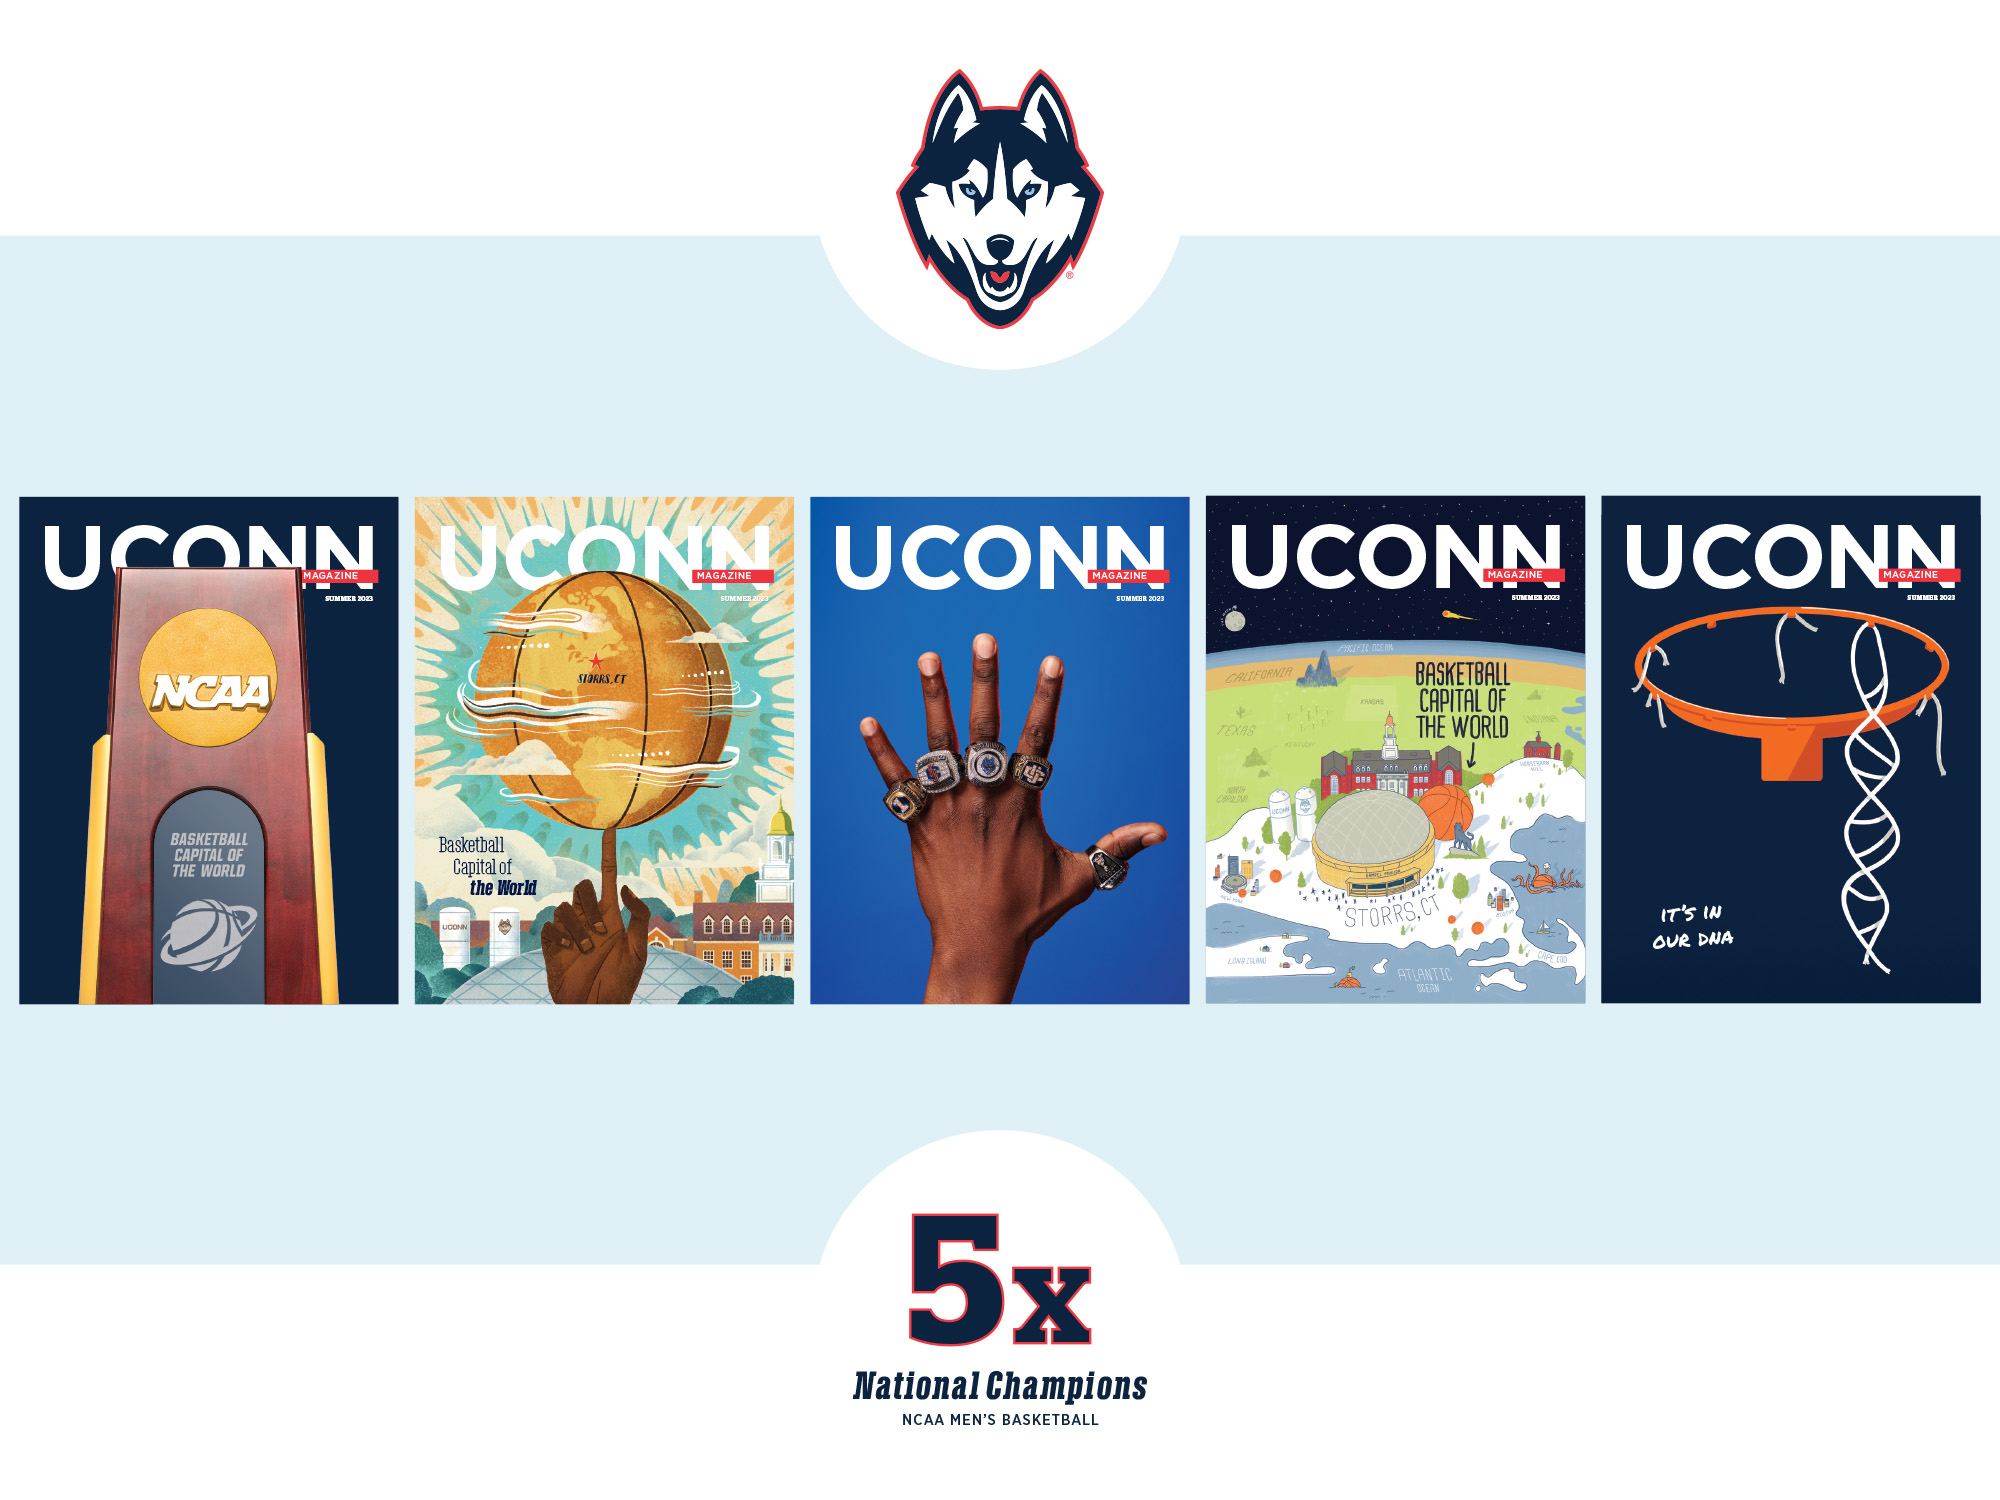 Printable Poster featuring 5 specialty covers celebrating the 5th championship win out of UConn Men's Basketball